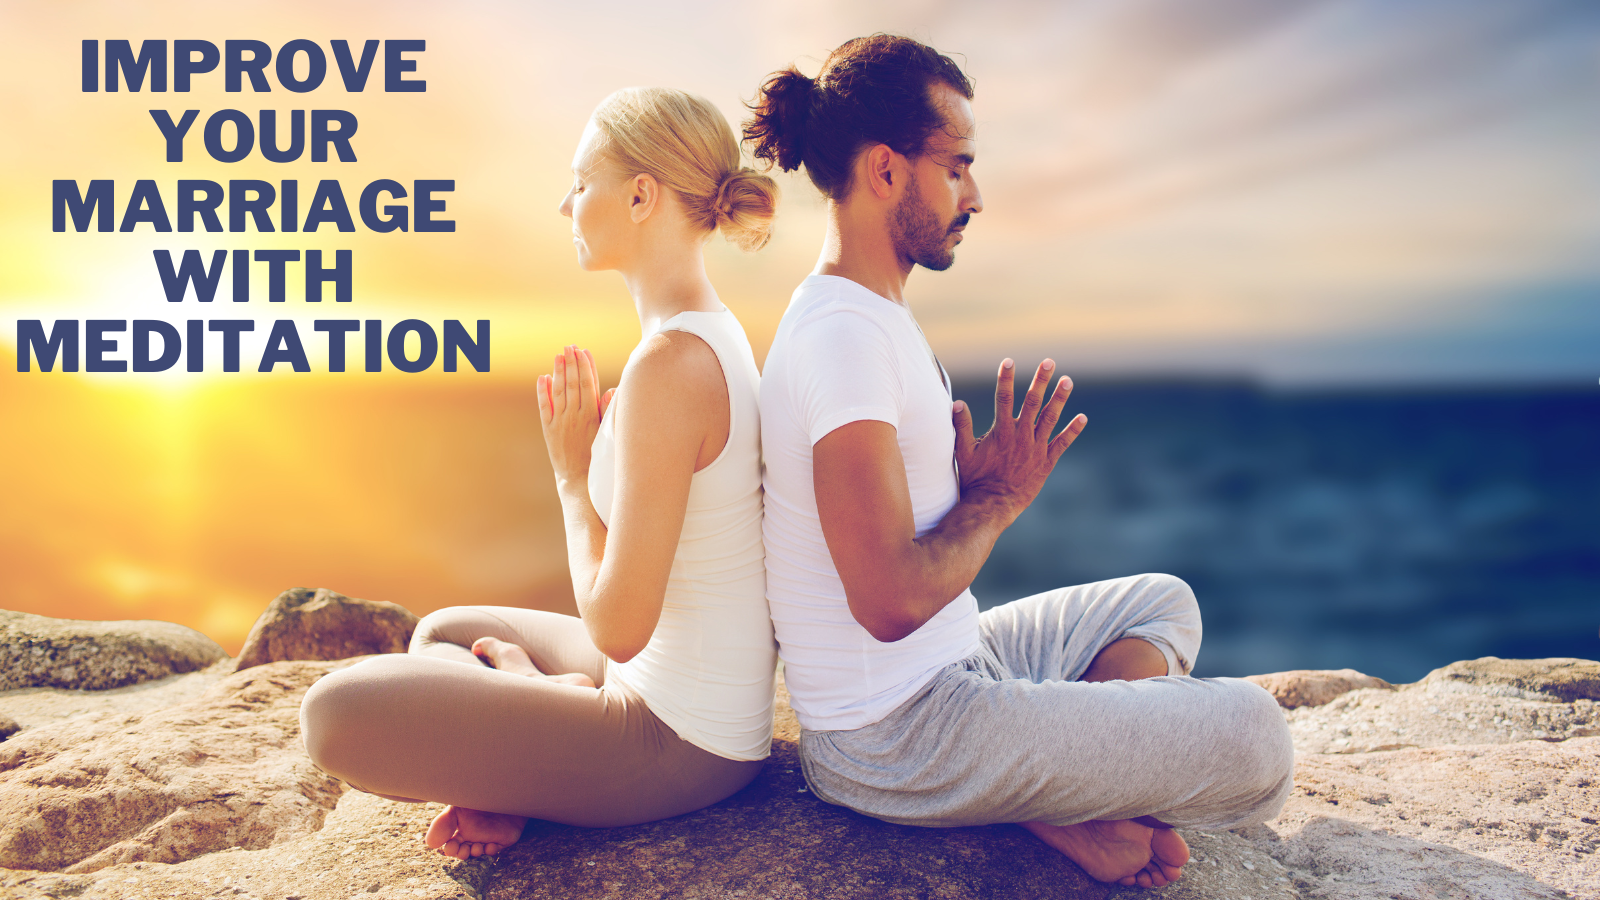 Best Tips To Improve Your Marriage With Meditation